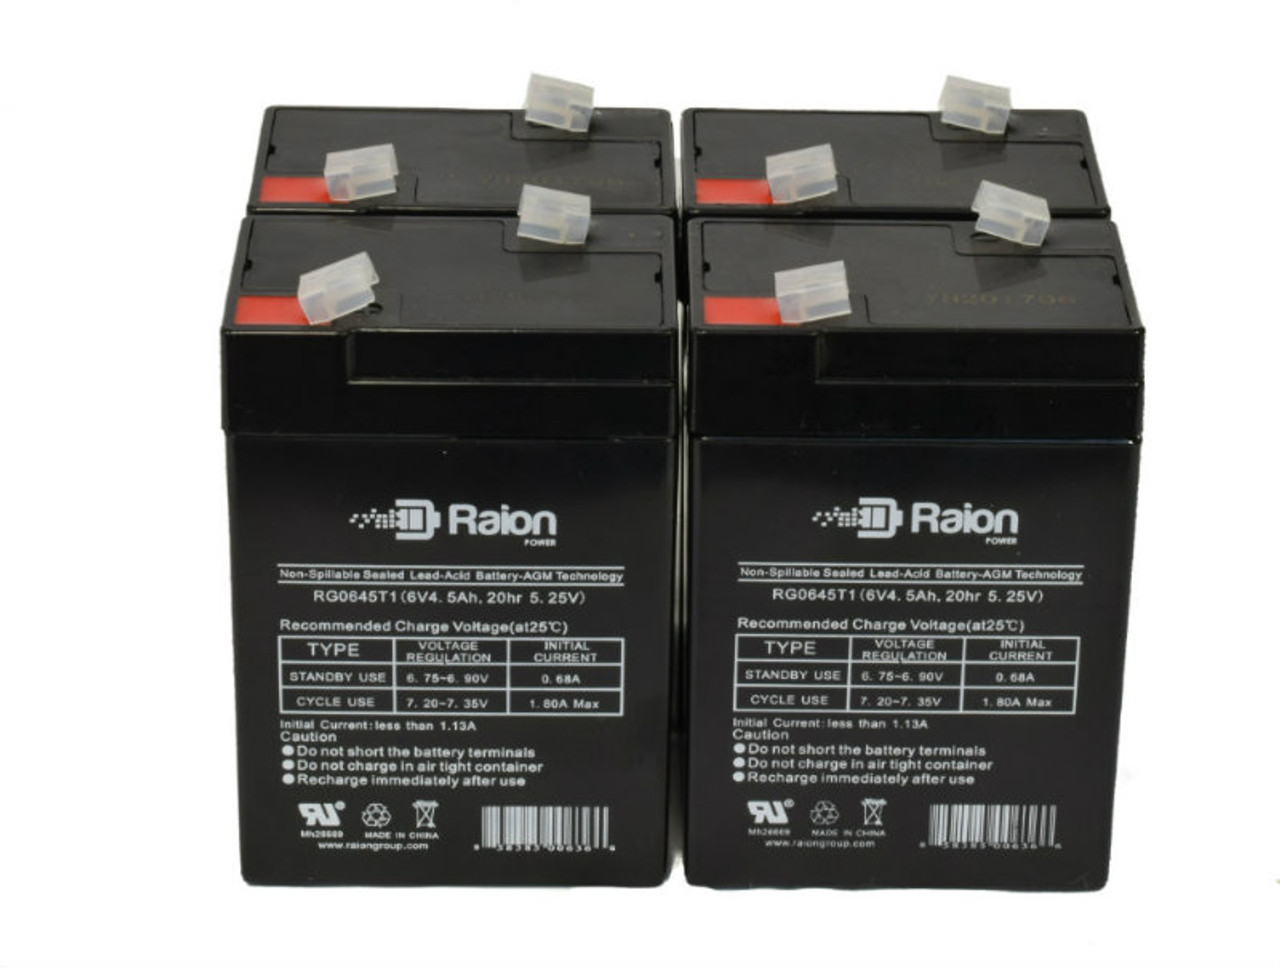 Raion Power 6V 4.5Ah Replacement Emergency Light Battery for Lithonia AQM EL - 4 Pack